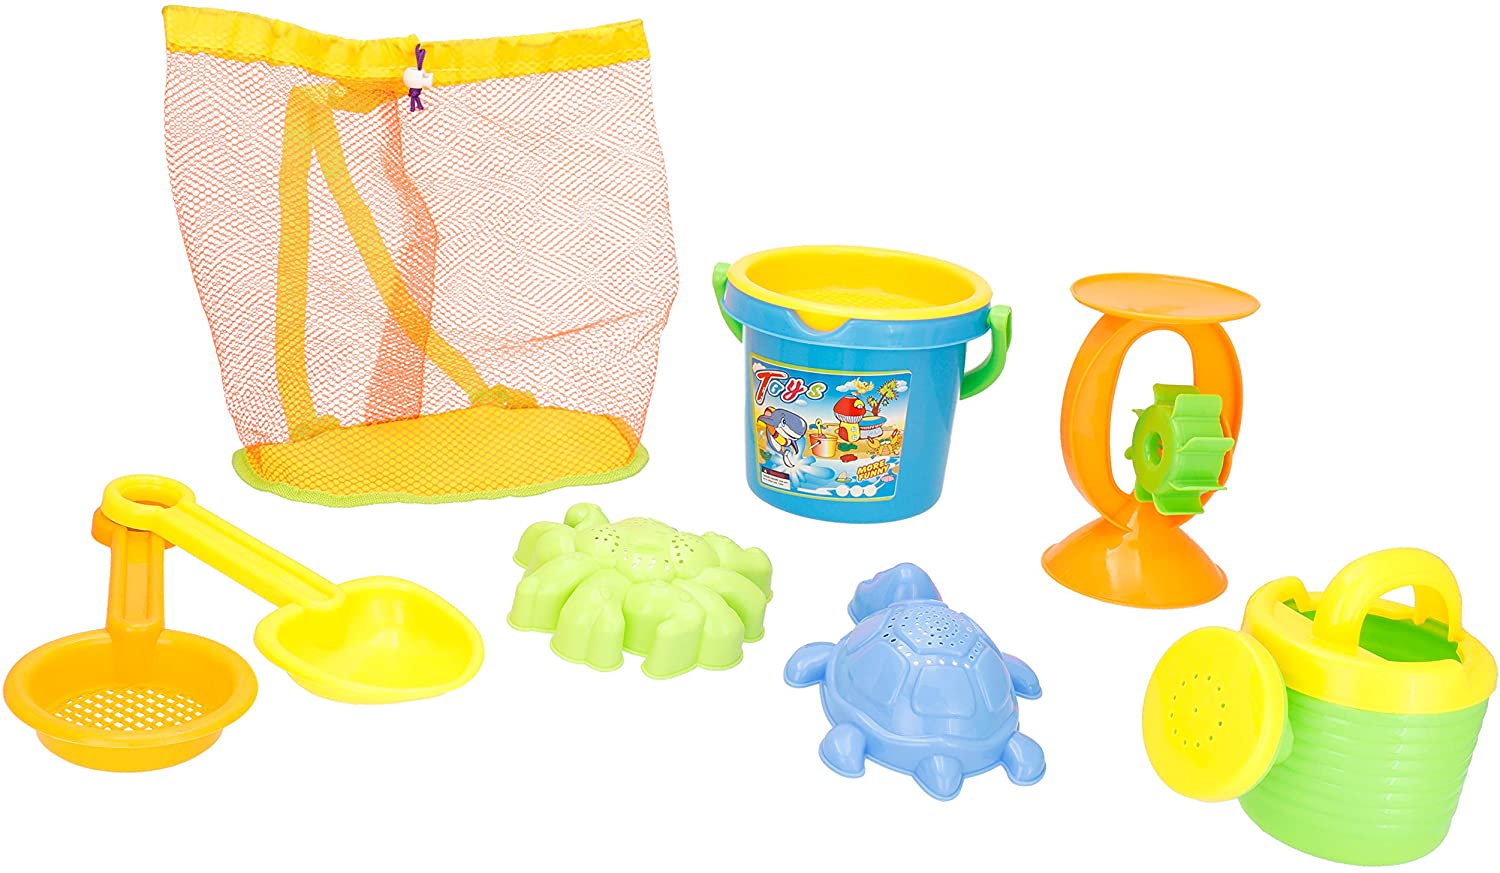 Bieco 06000217 7 Piece Sand Play Set In Mesh Backpack, Bucket With Accessor